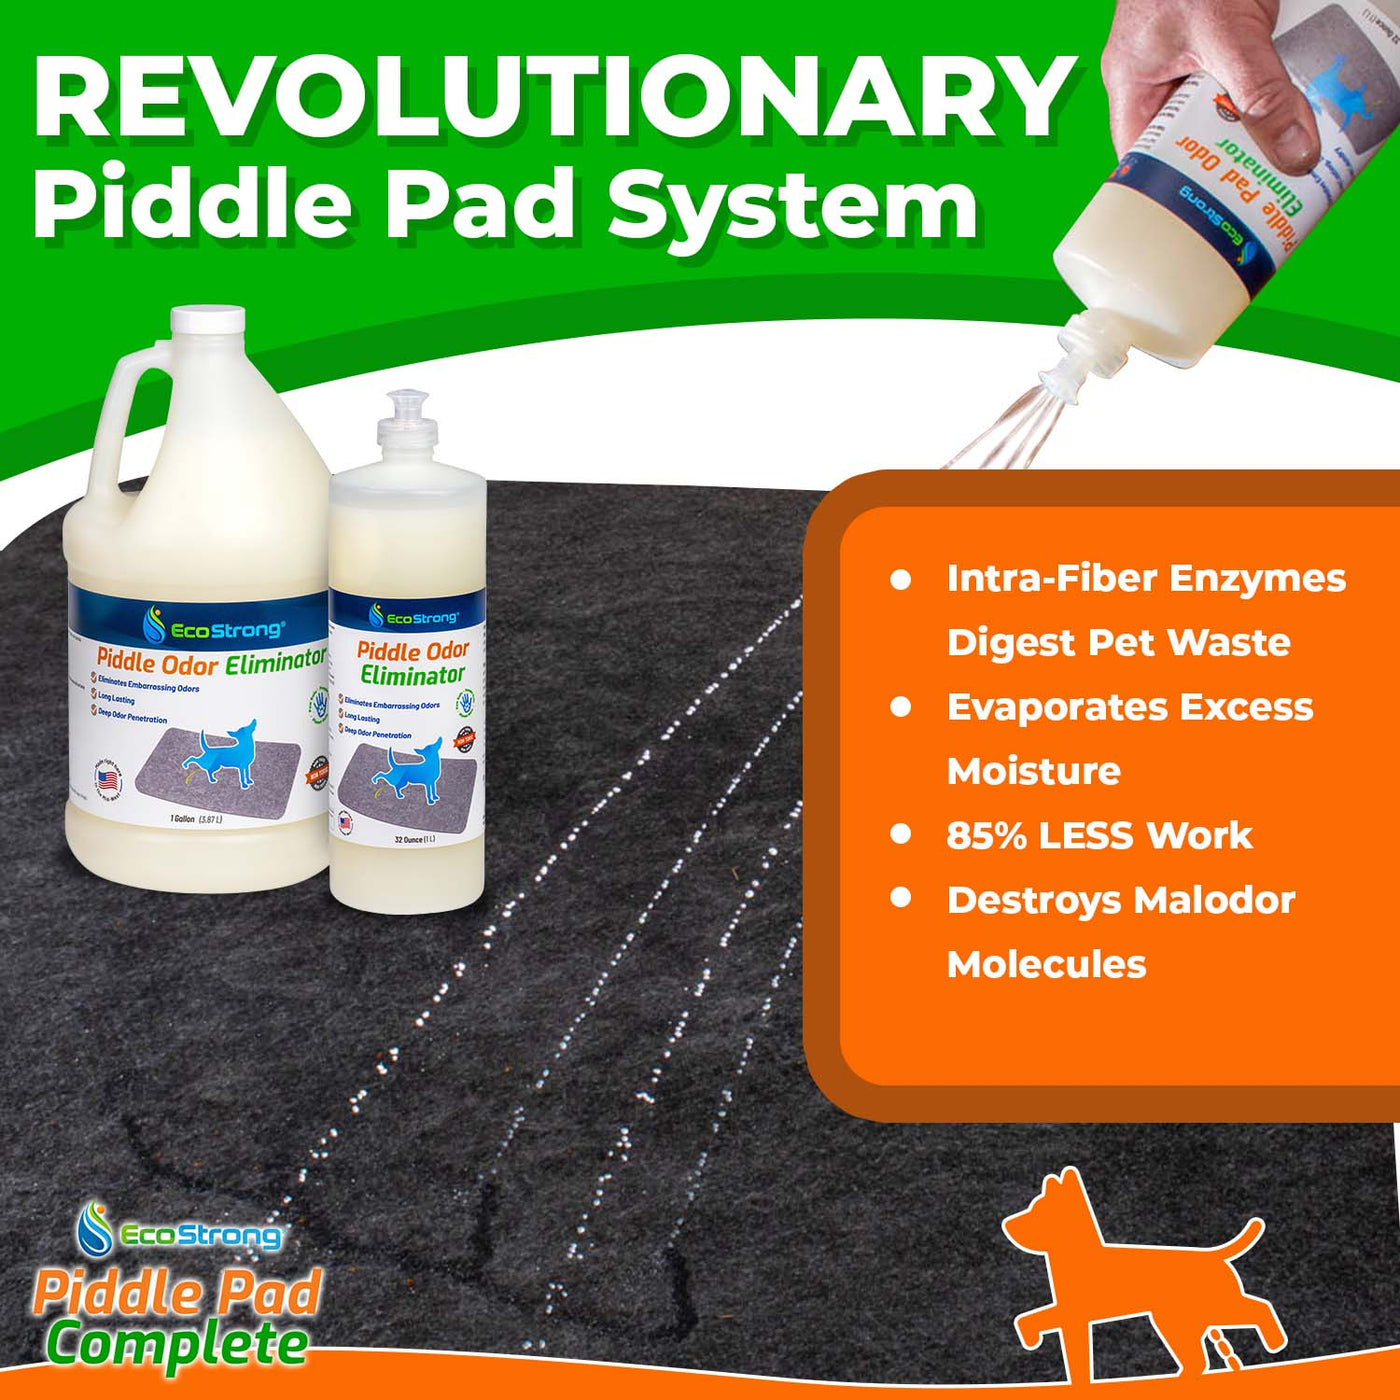 EcoStrong Piddle Pad Complete#size_two-36-x-72-inch-pads-and-two-32-oz-piddle-odor-eliminators